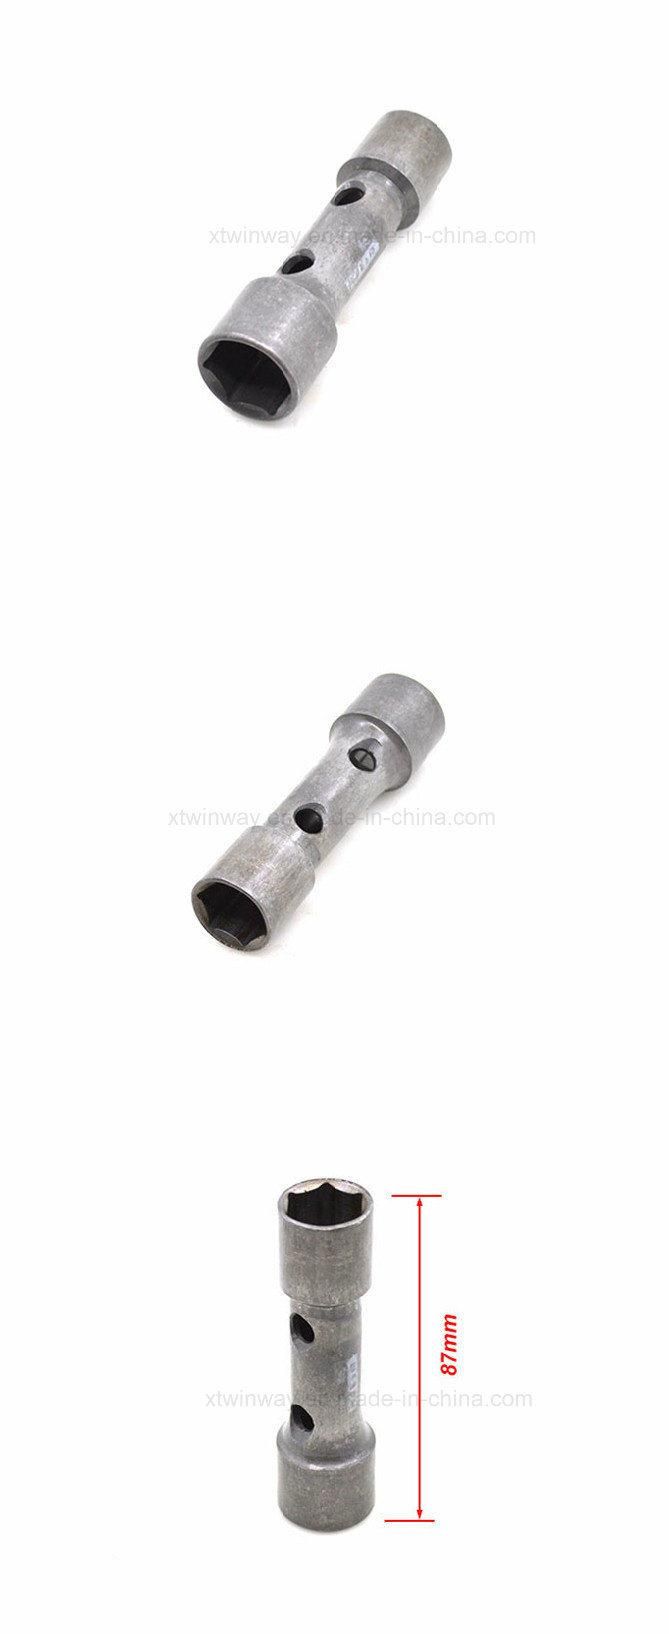 Ww-8546 Universal Motorcycle Parts A7tc/D8tc Spark Plug Wrench Removal Tool